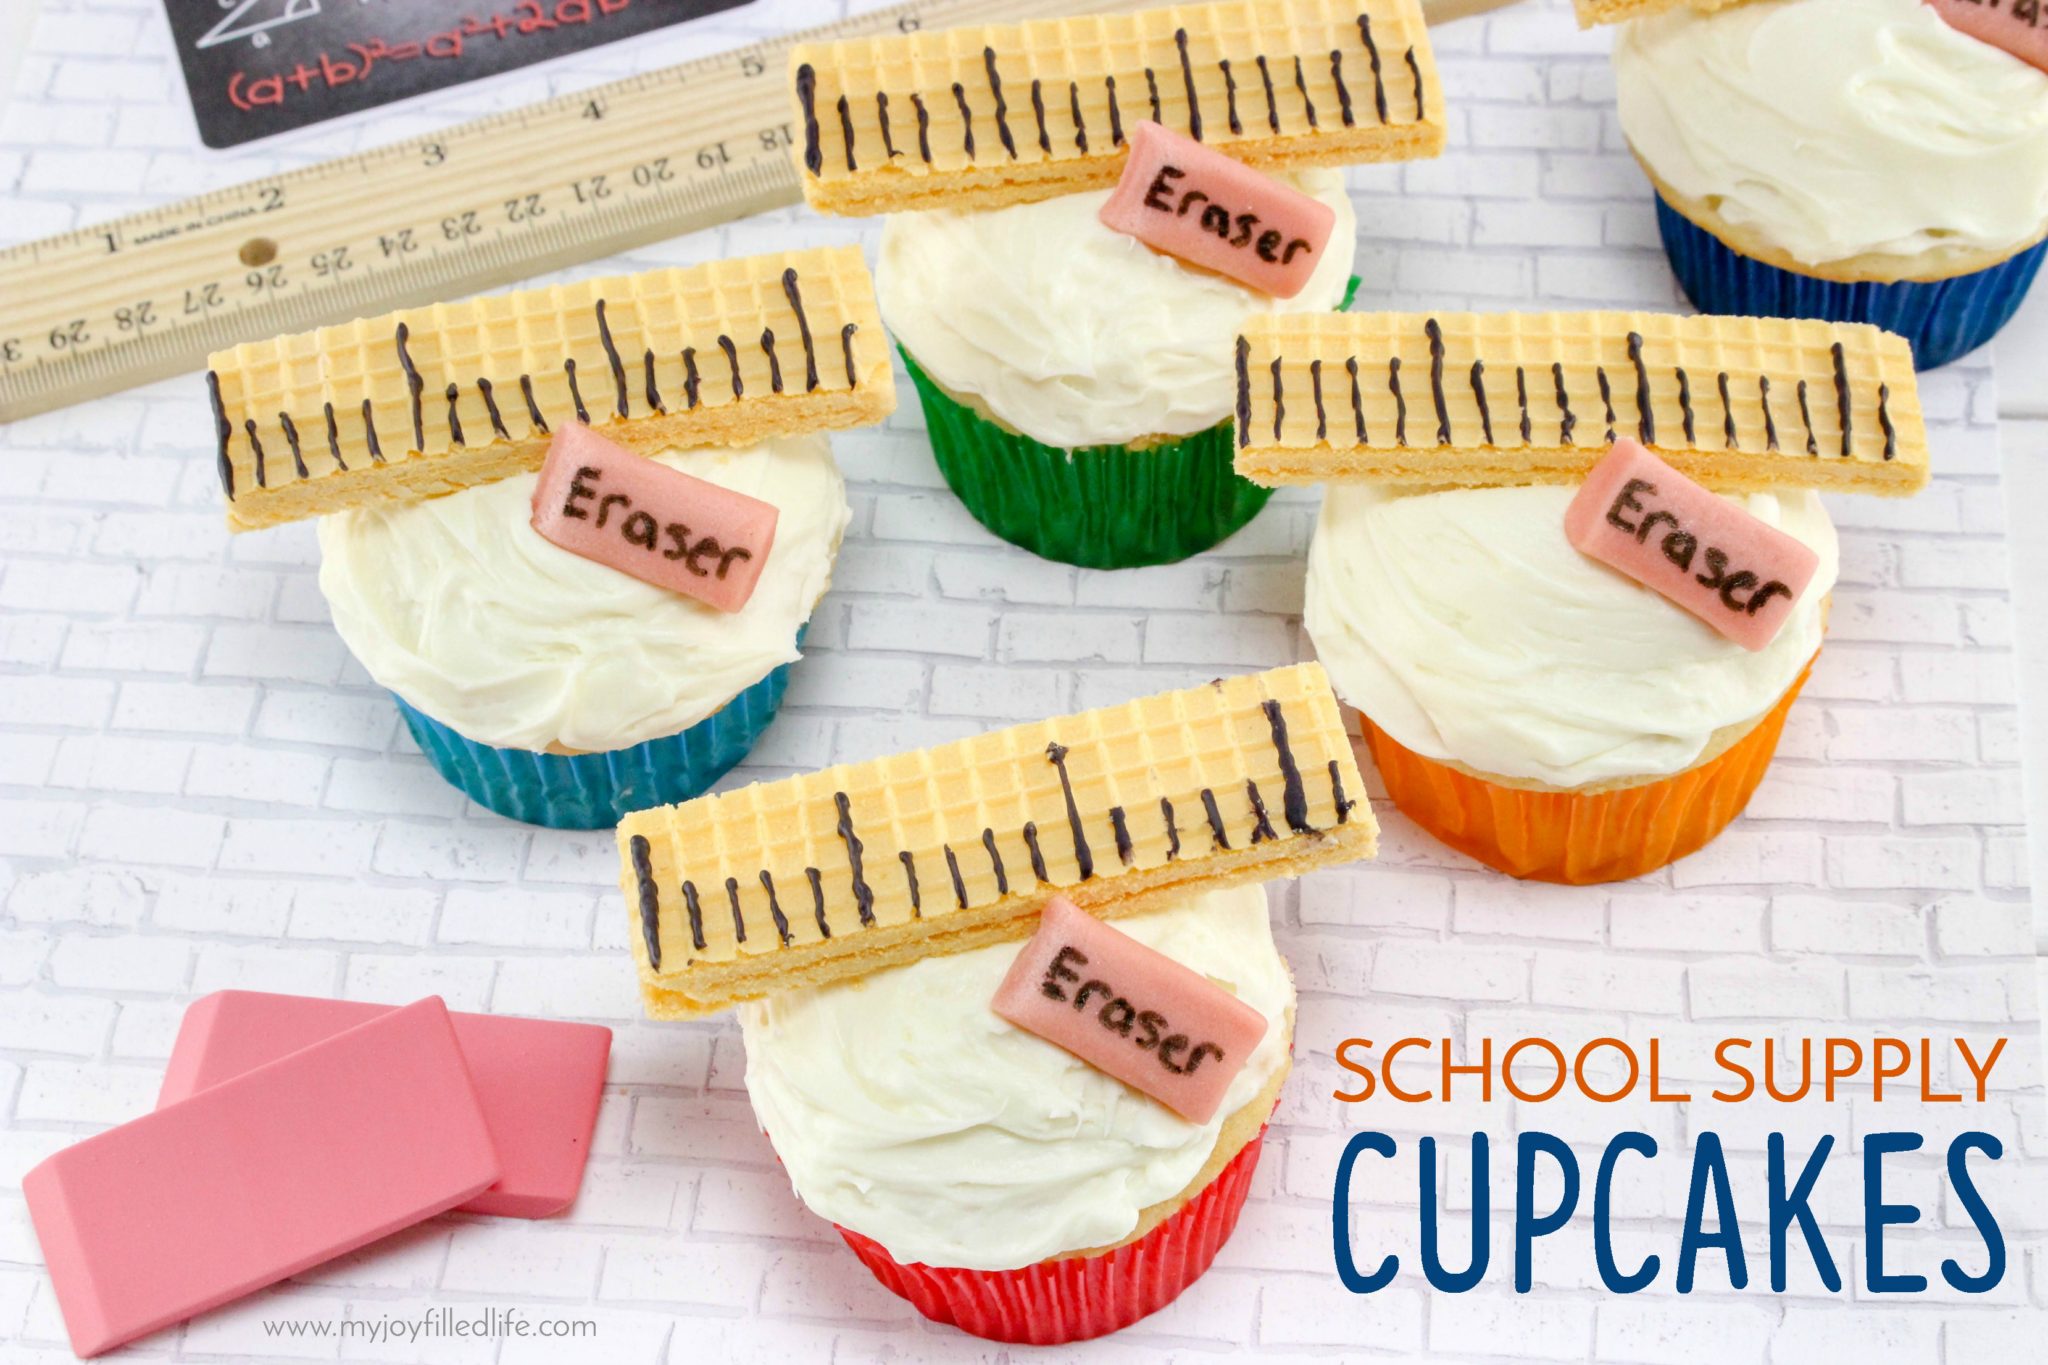 School Supply Cupcakes for Back to School